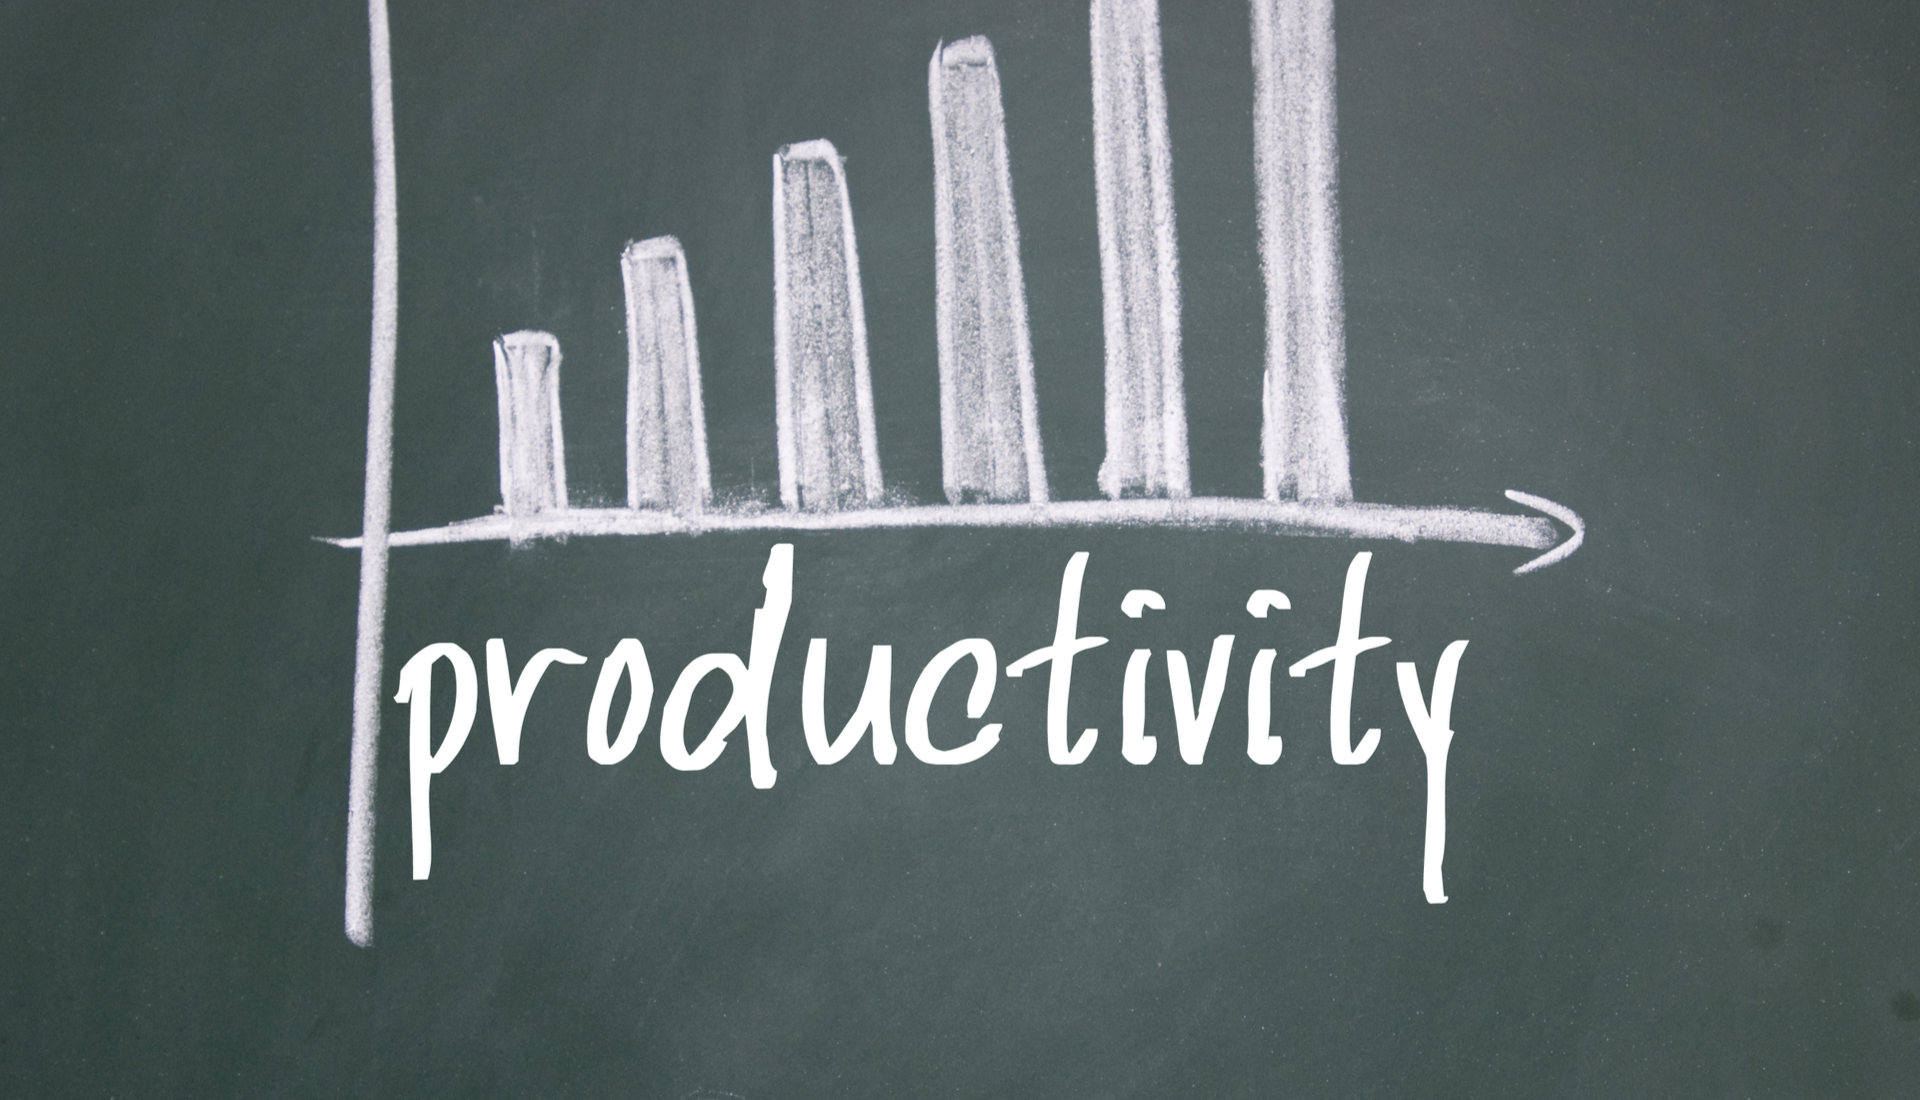 Putting the PRO back into Productivity